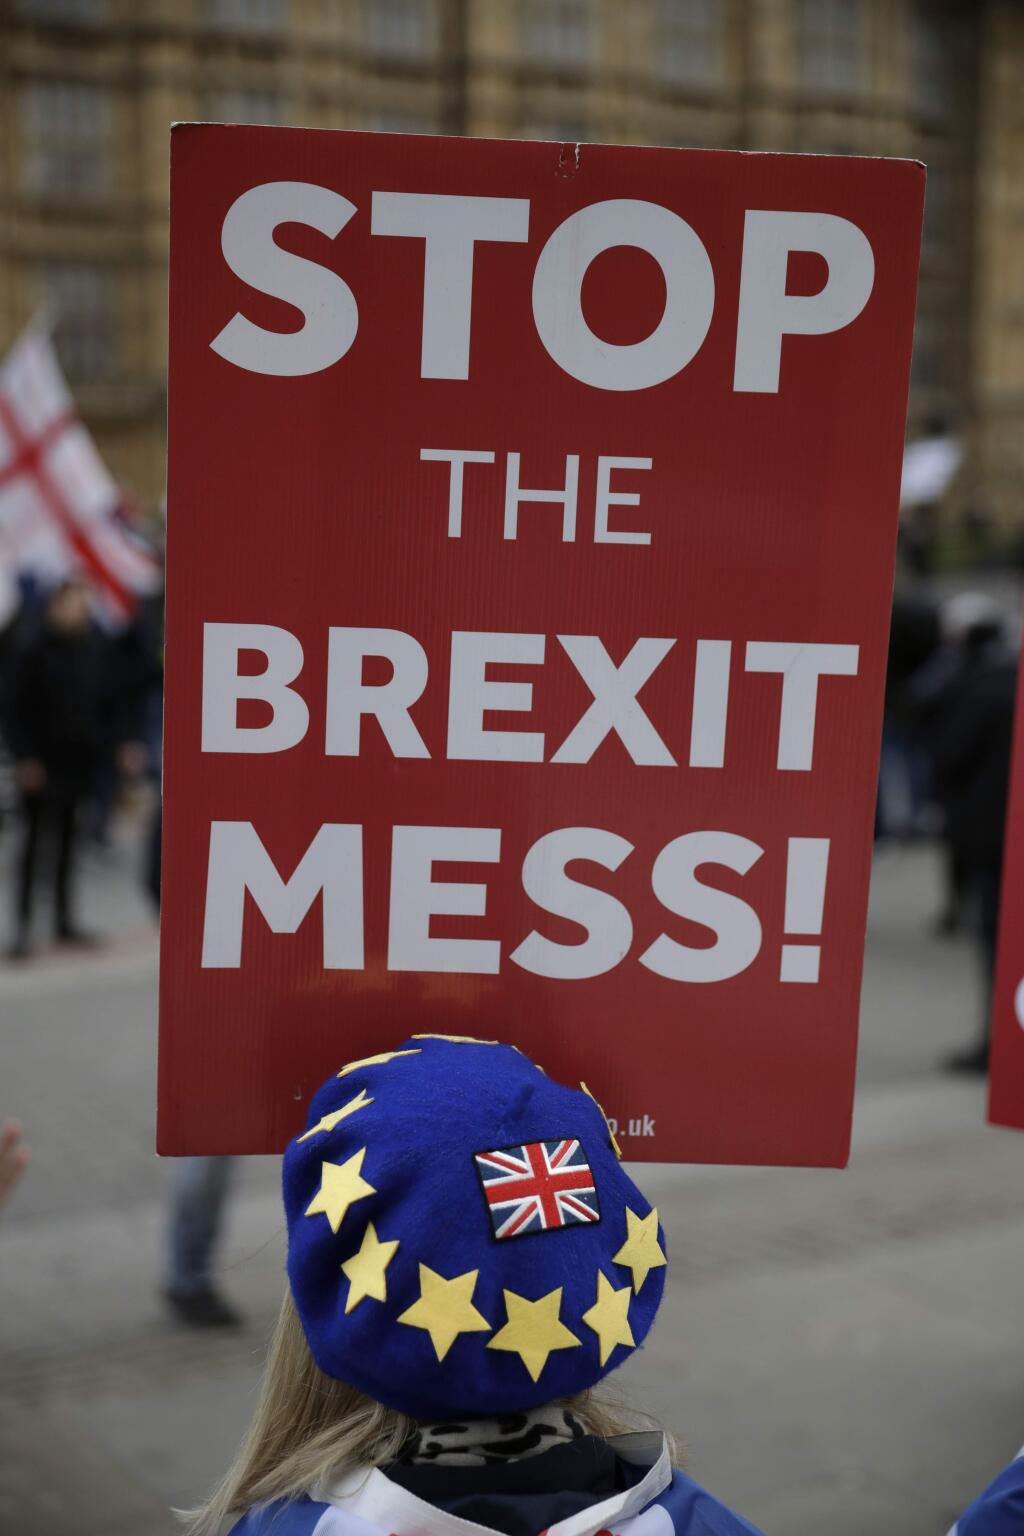 An anti-Brexit remain in the European Union supporter holds a placard as they demonstrate opposite the Houses of Parliament in London, Monday, Jan. 21, 2019. Prime Minister Theresa May says Britain is scrapping a fee it was due to charge European Union citizens applying to settle permanently in the U.K. after Brexit. (AP Photo/Matt Dunham)